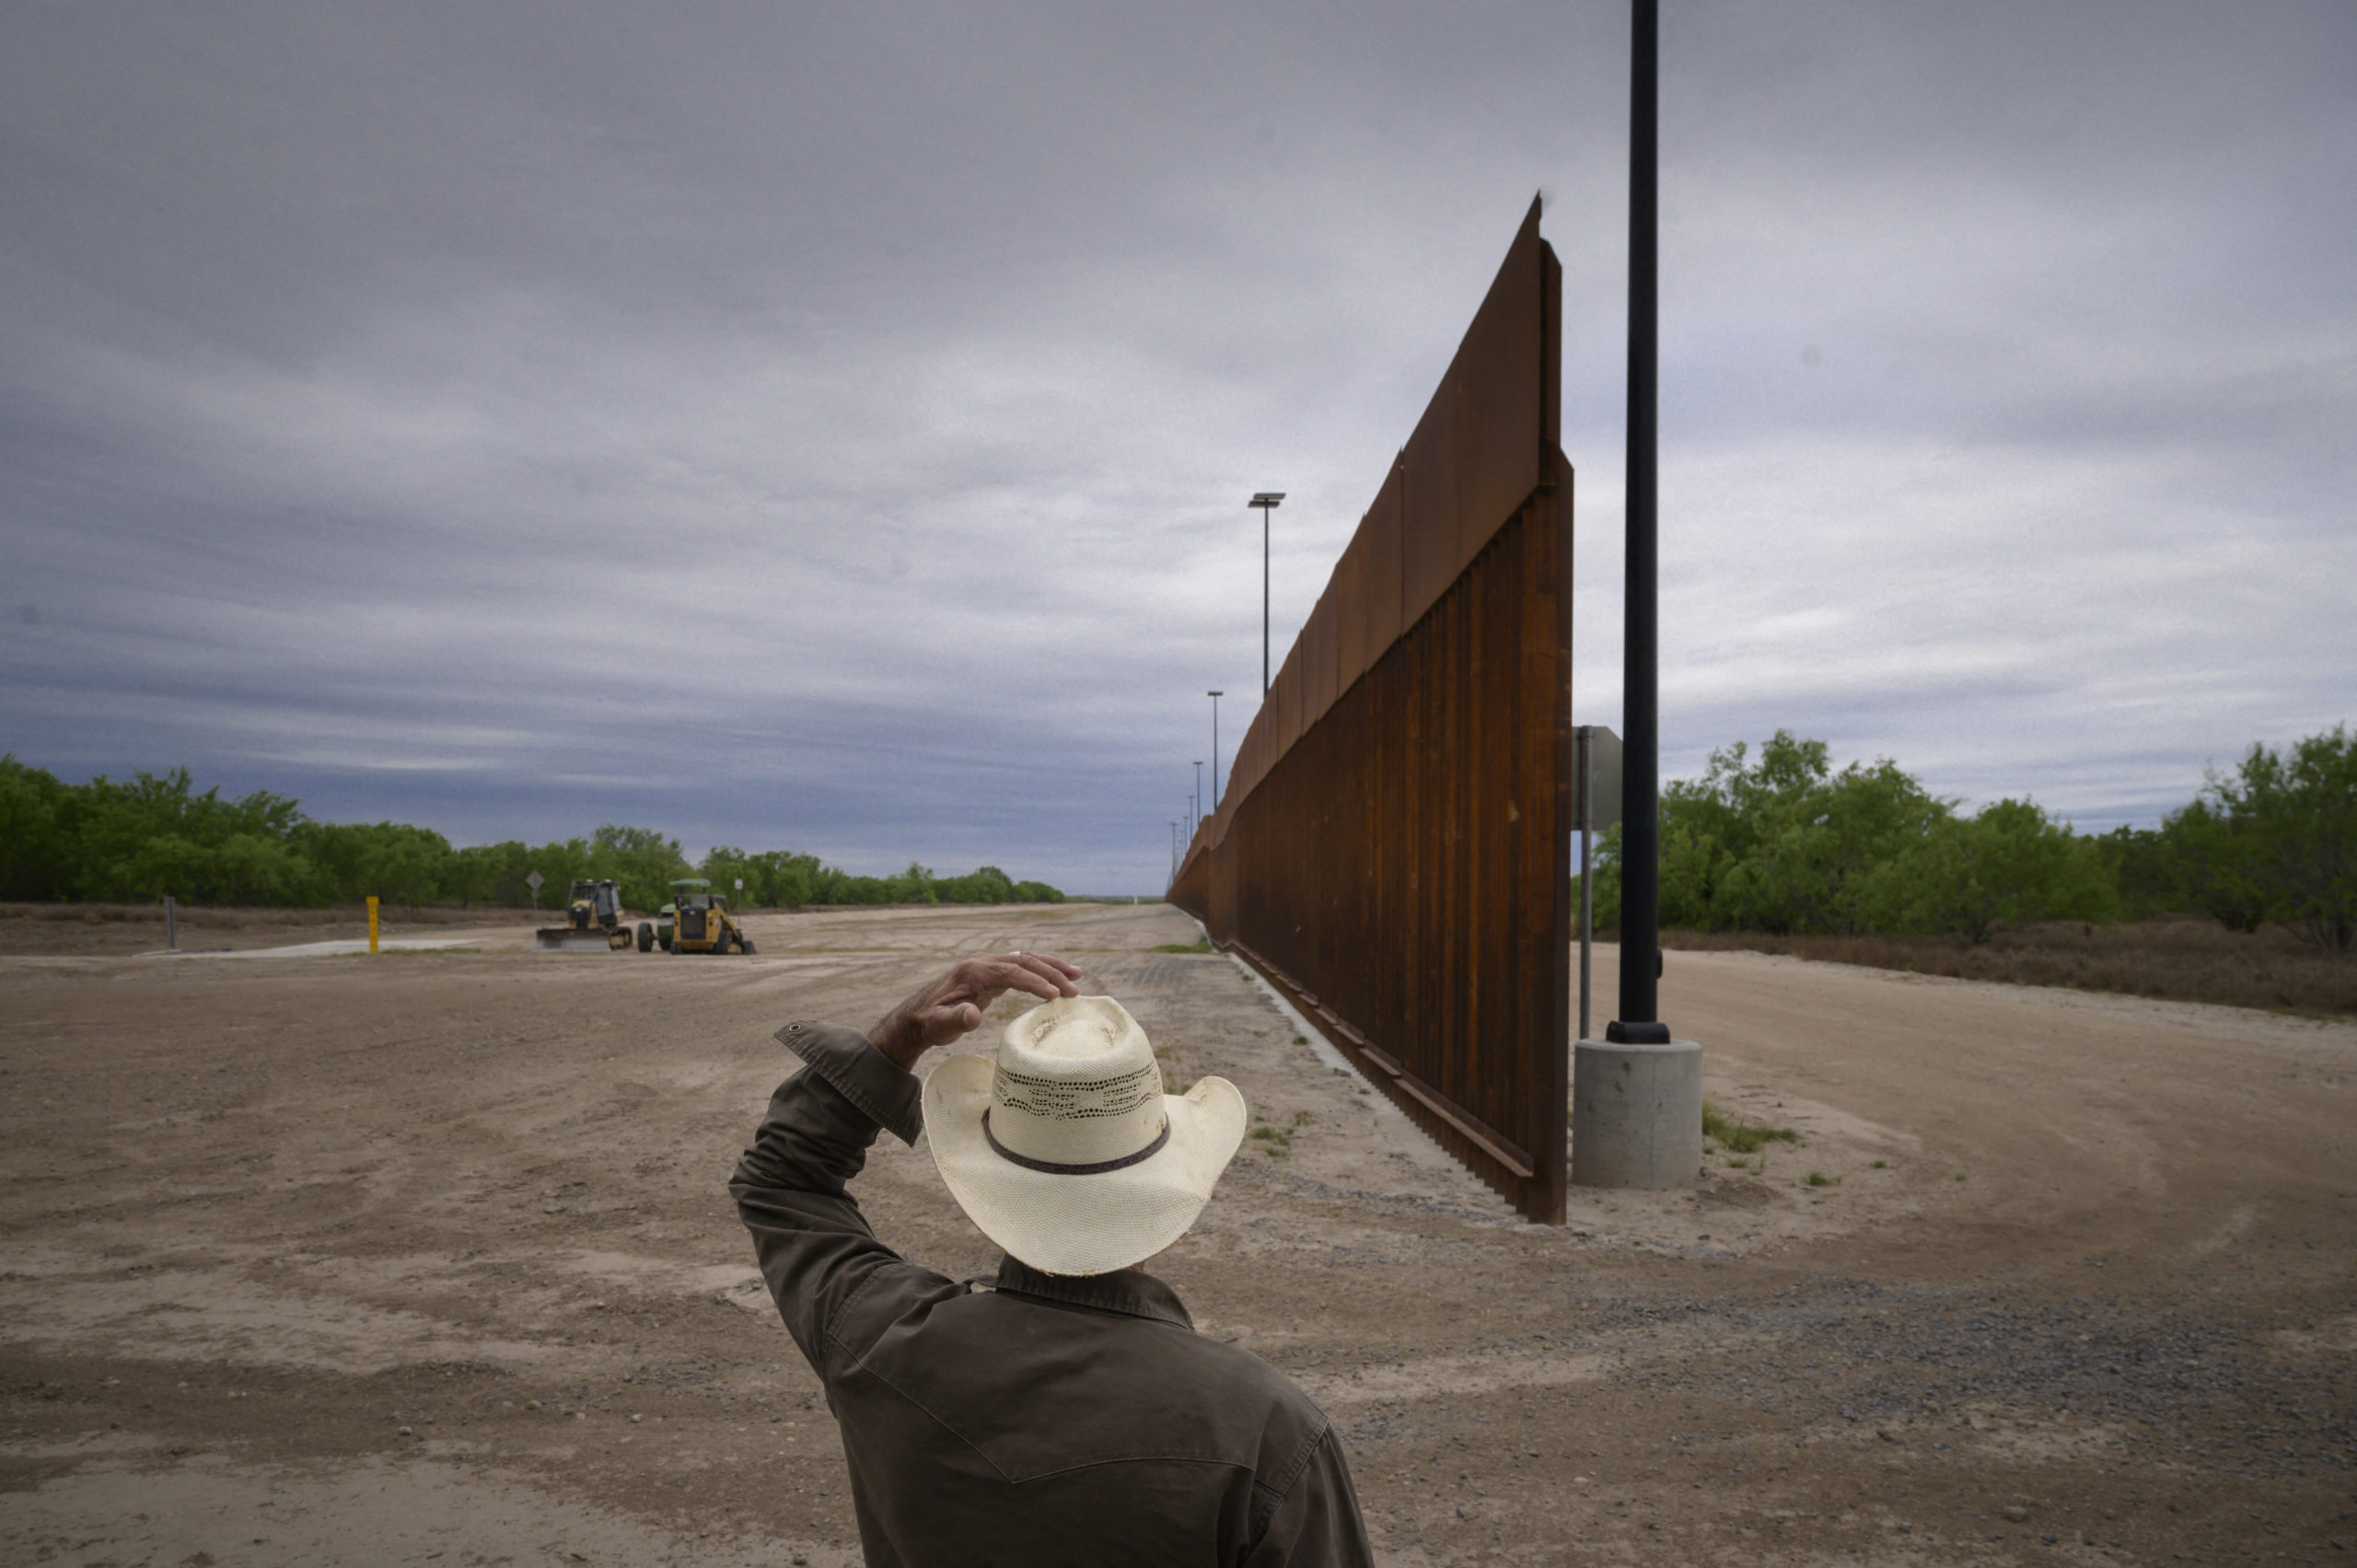 In a photo taken on March 28, 2021 ranch owner Tony Sandoval (67) stands before a portion of the unfinished border wall that former US President Donald Trump tried to build, near the southern Texas border city of Roma. (Photo by ED JONES/AFP via Getty Images)